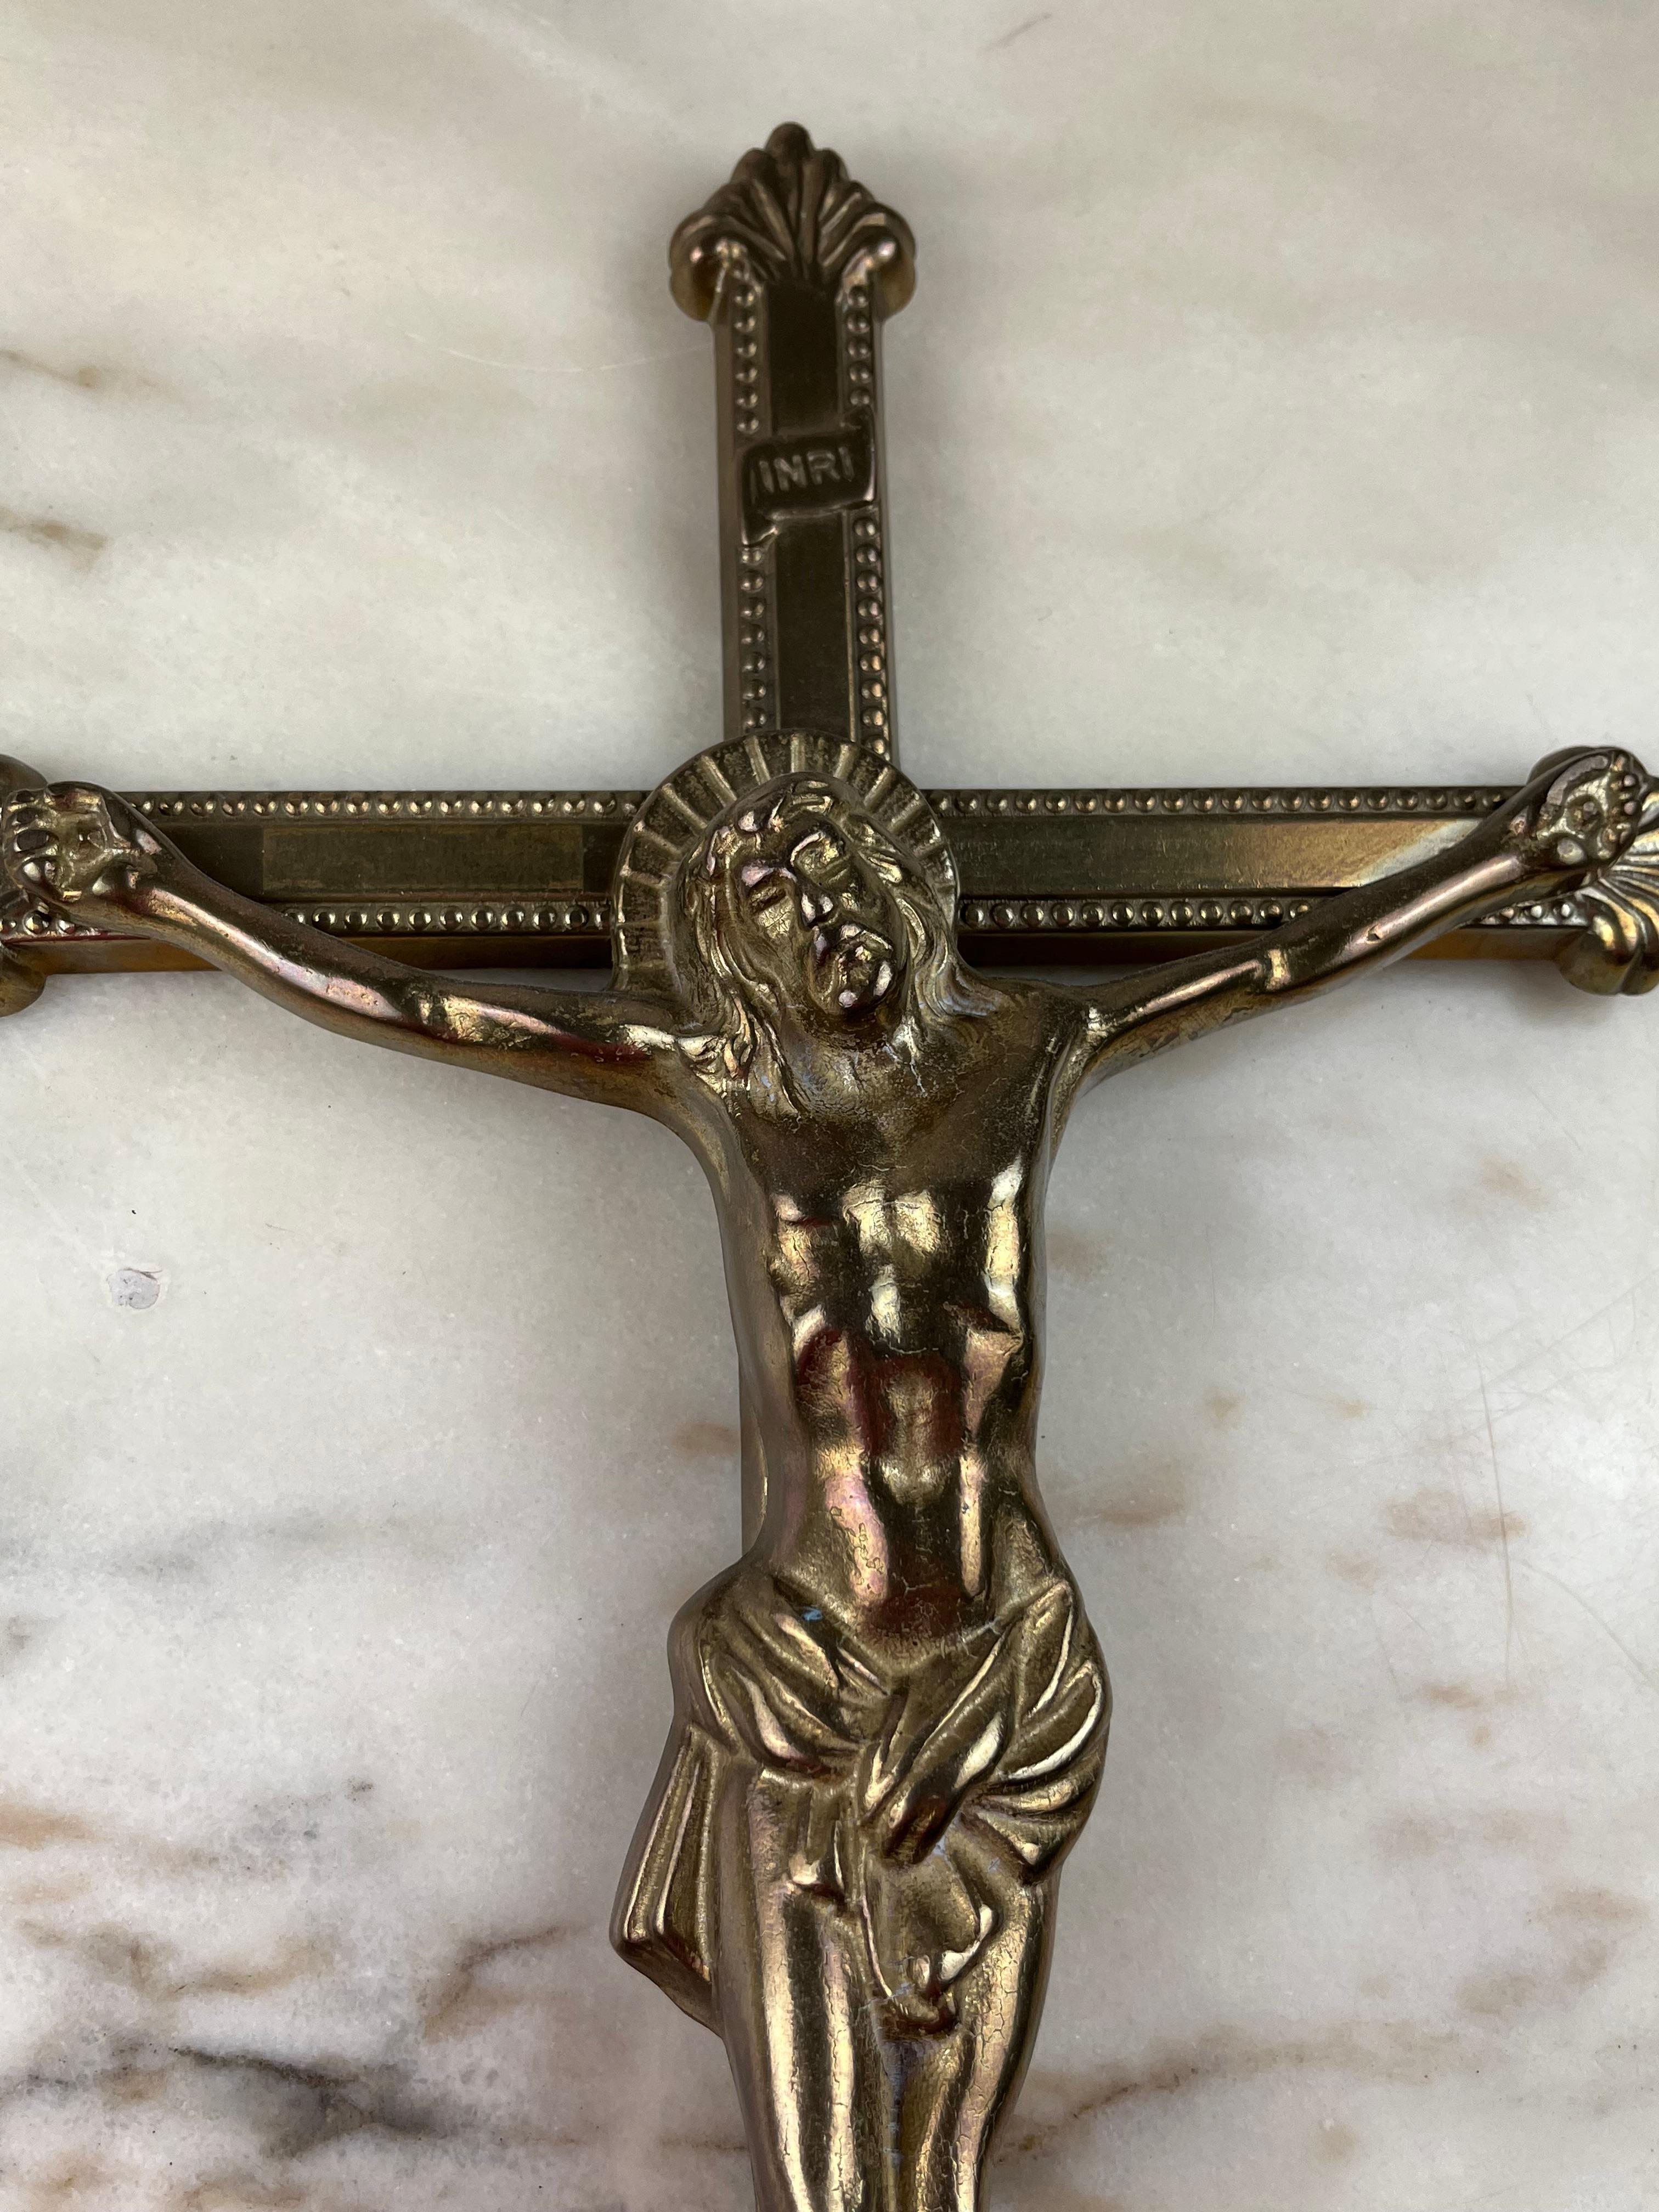 Brass crucifix, Italy, 1960s
It belonged to an elderly aunt of my parents.
Small signs of the time.